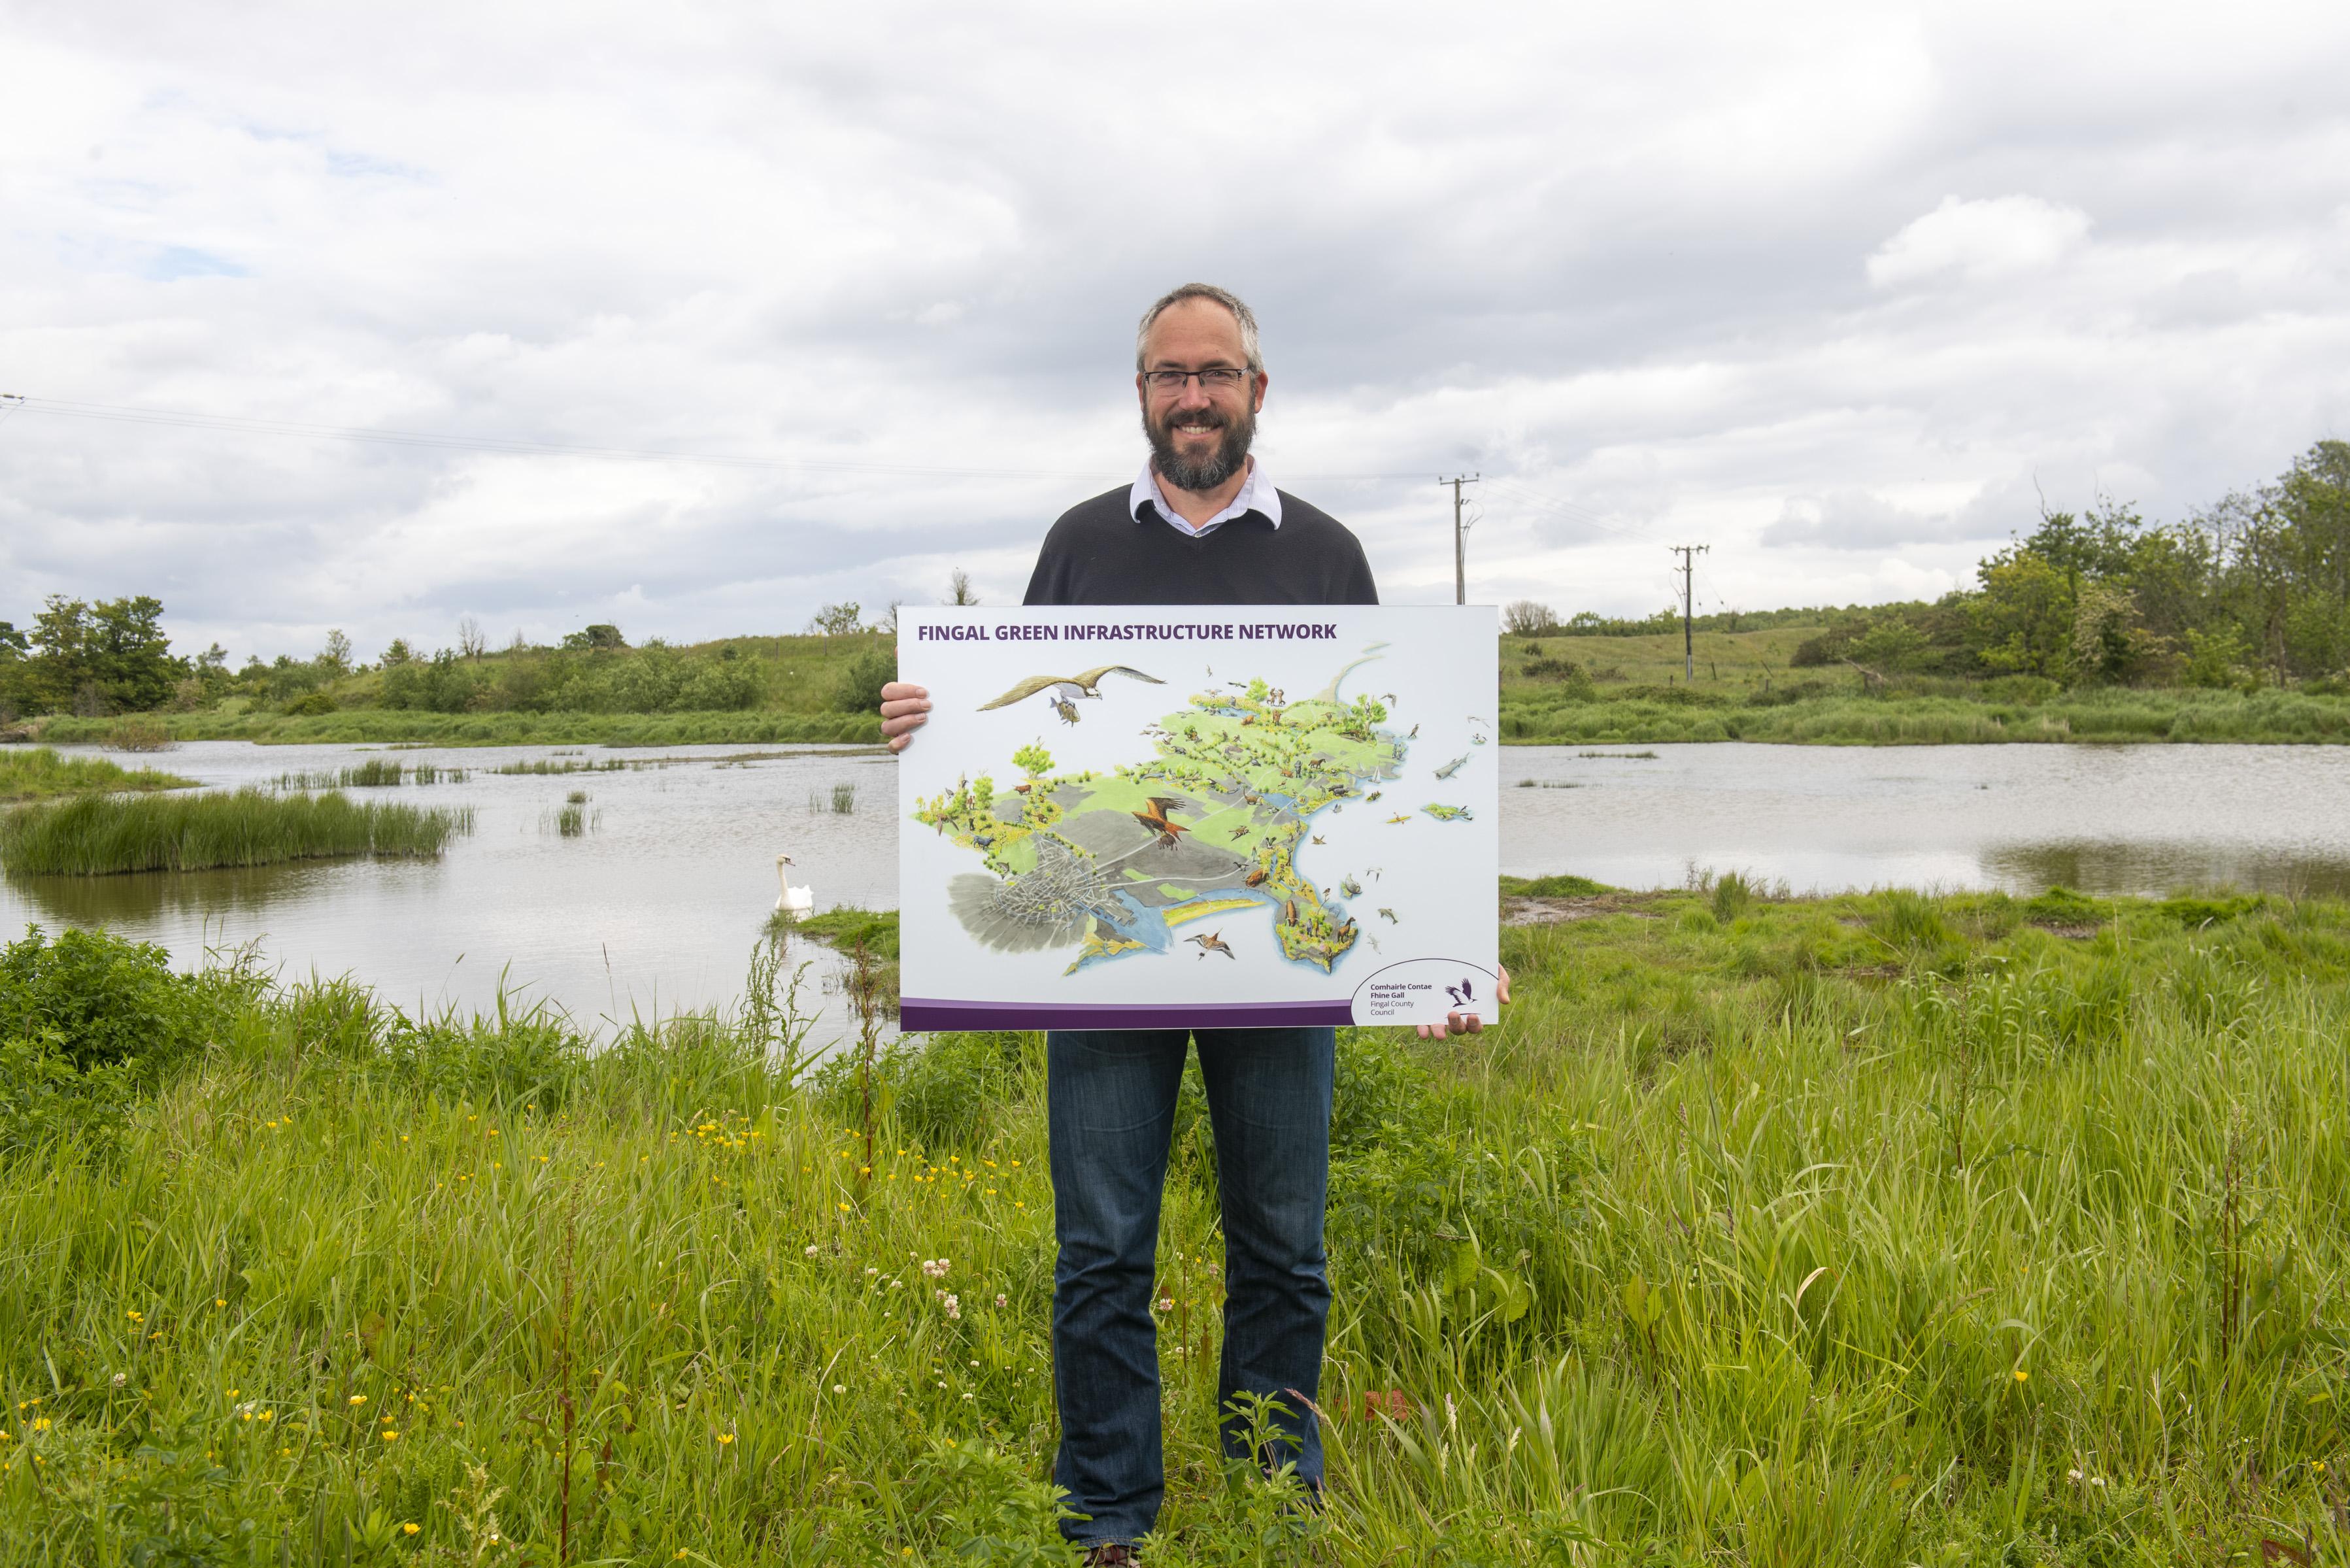 bearded man holding illustration of fingal county stands next to water with swans in background